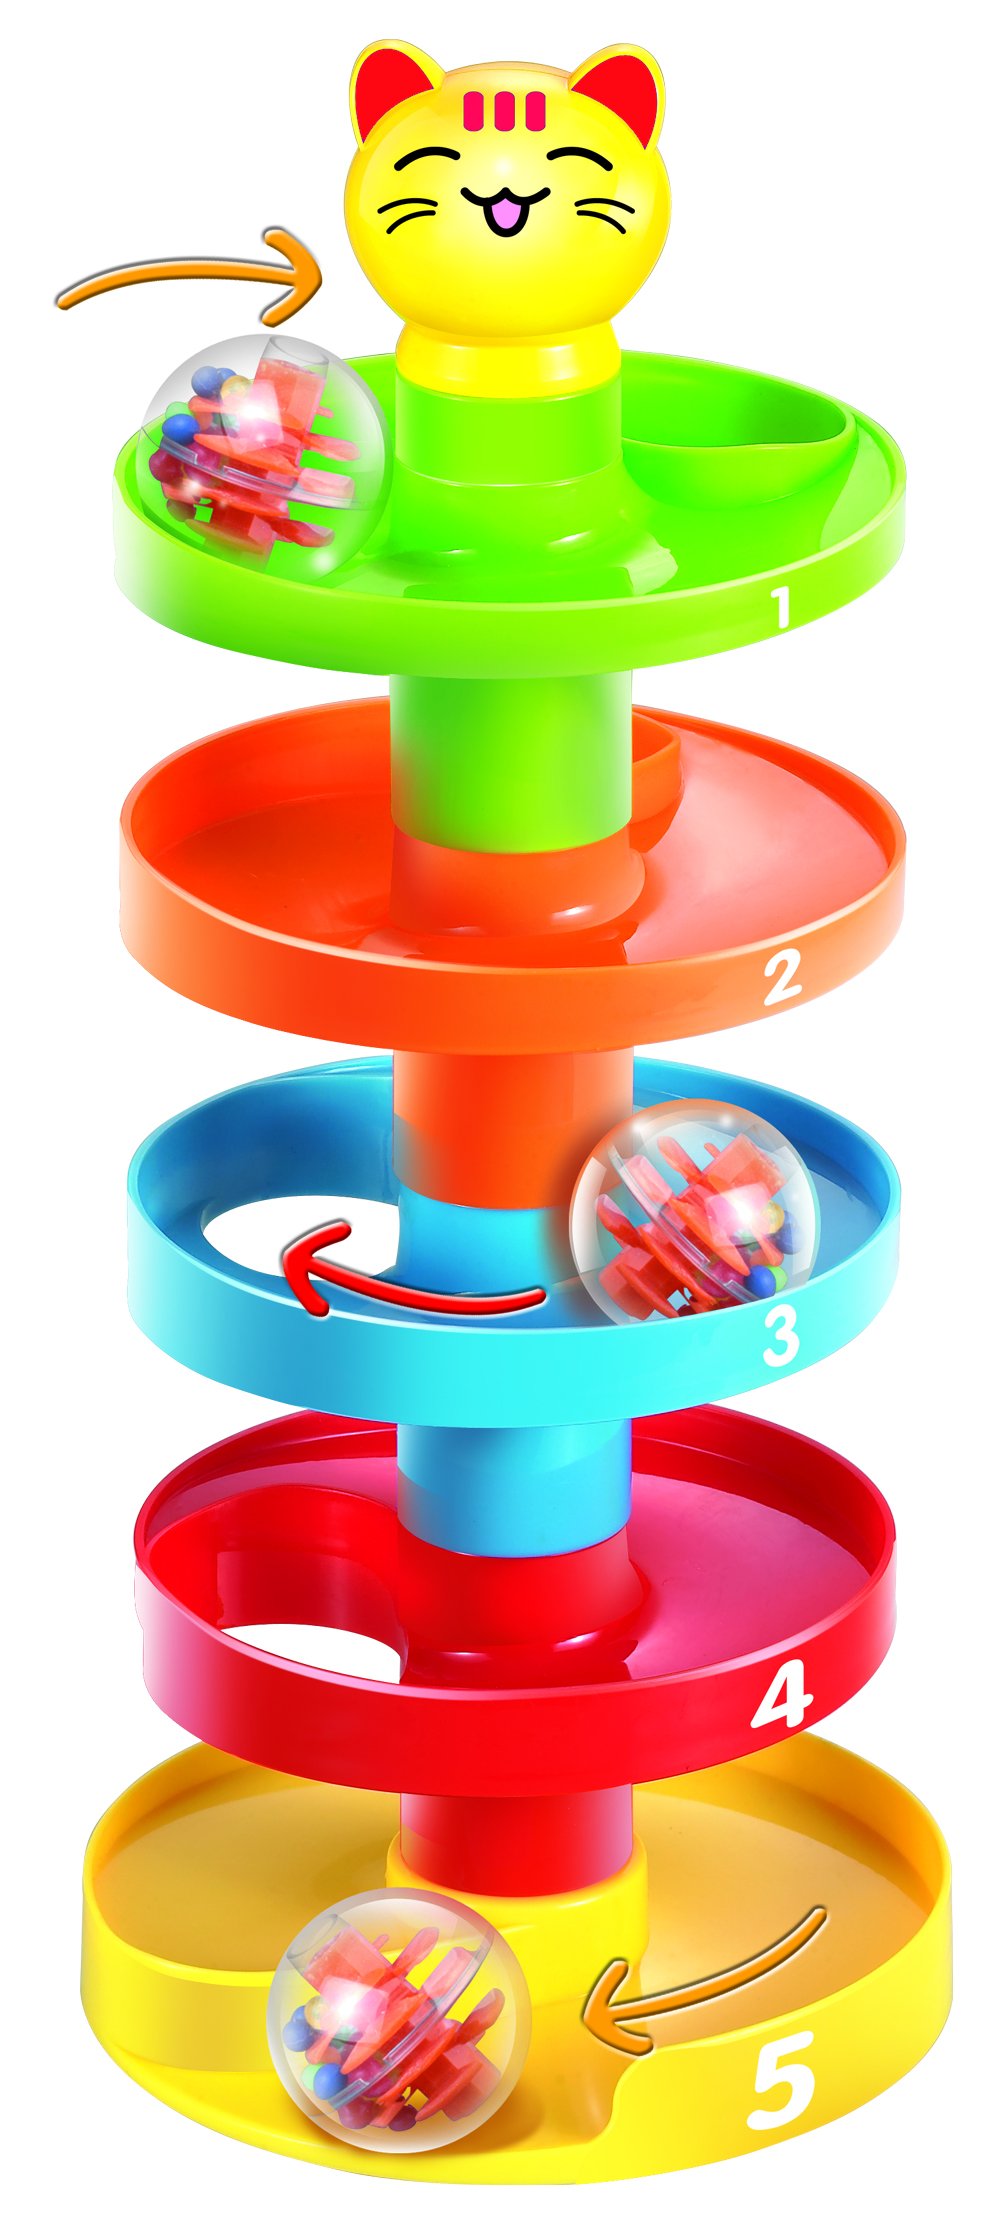 5 Layer Ball Drop and Roll Swirling Tower for Baby and Toddler Development Educational Toys | Stack, Drop and Go Ball Ramp Toy Set Includes 3 Spinning Acrylic Activity Balls with Colorful Beads